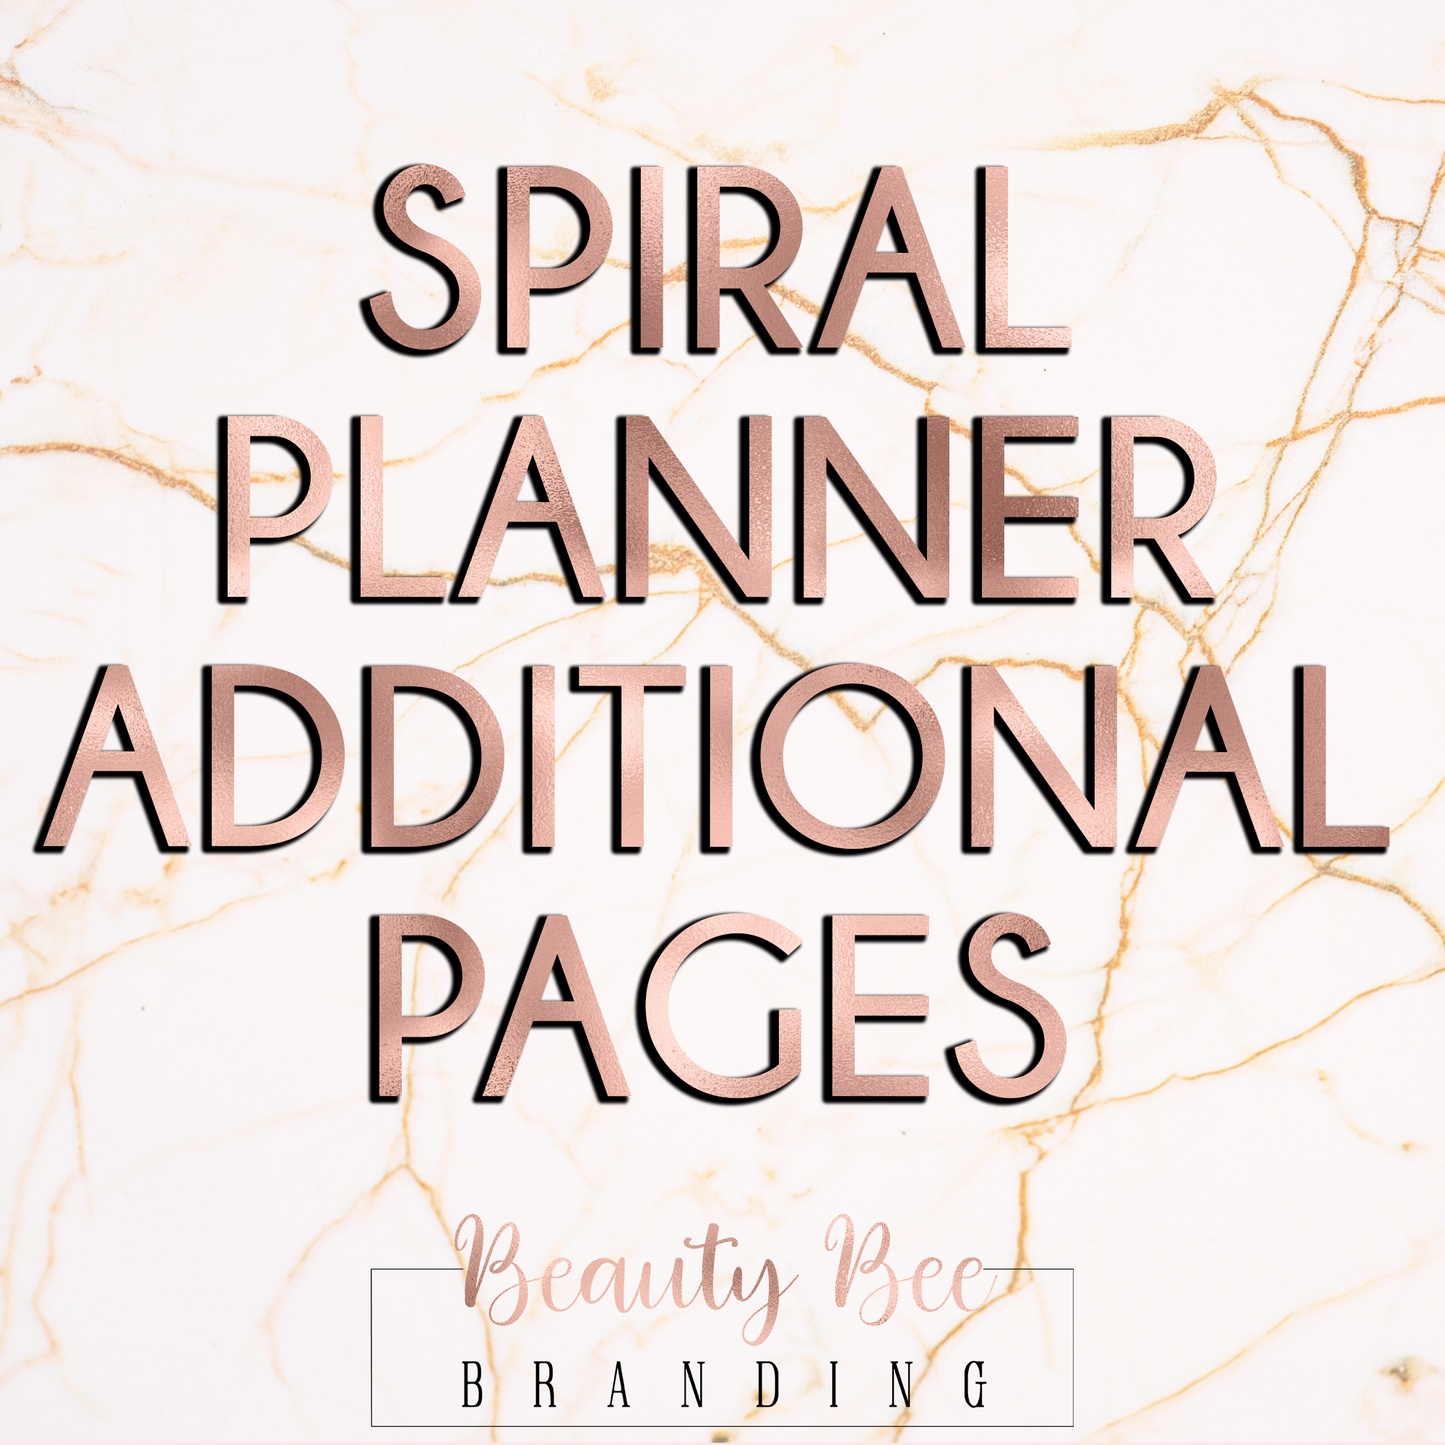 Spiral Planner Additional Pages